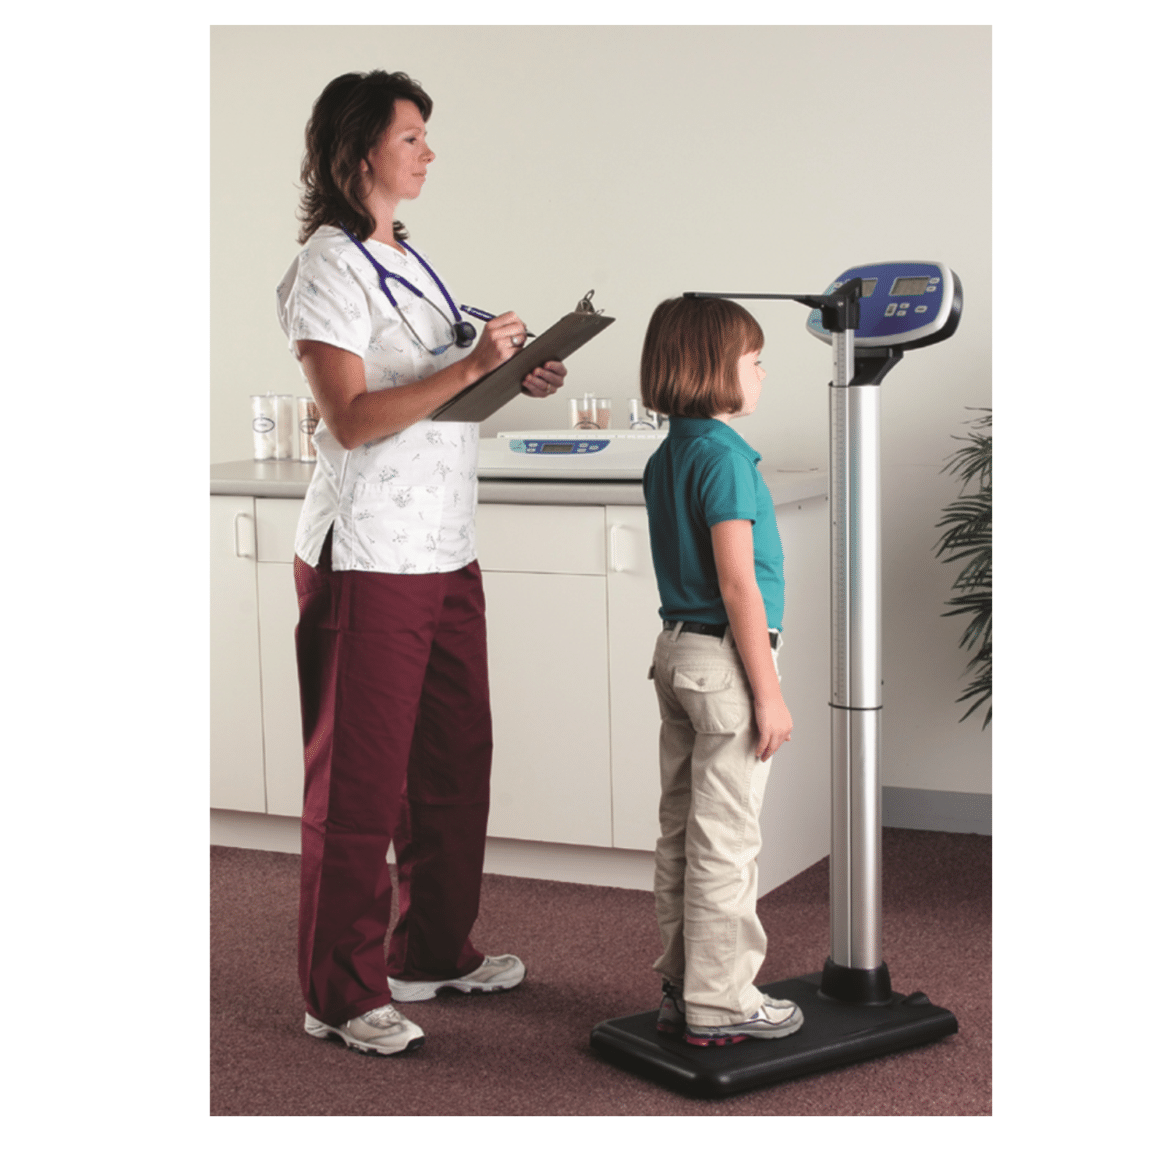 Doran DS5100 Digital Physician s Scale - Medical Scales and Measuring  Systems - Future Health Concepts